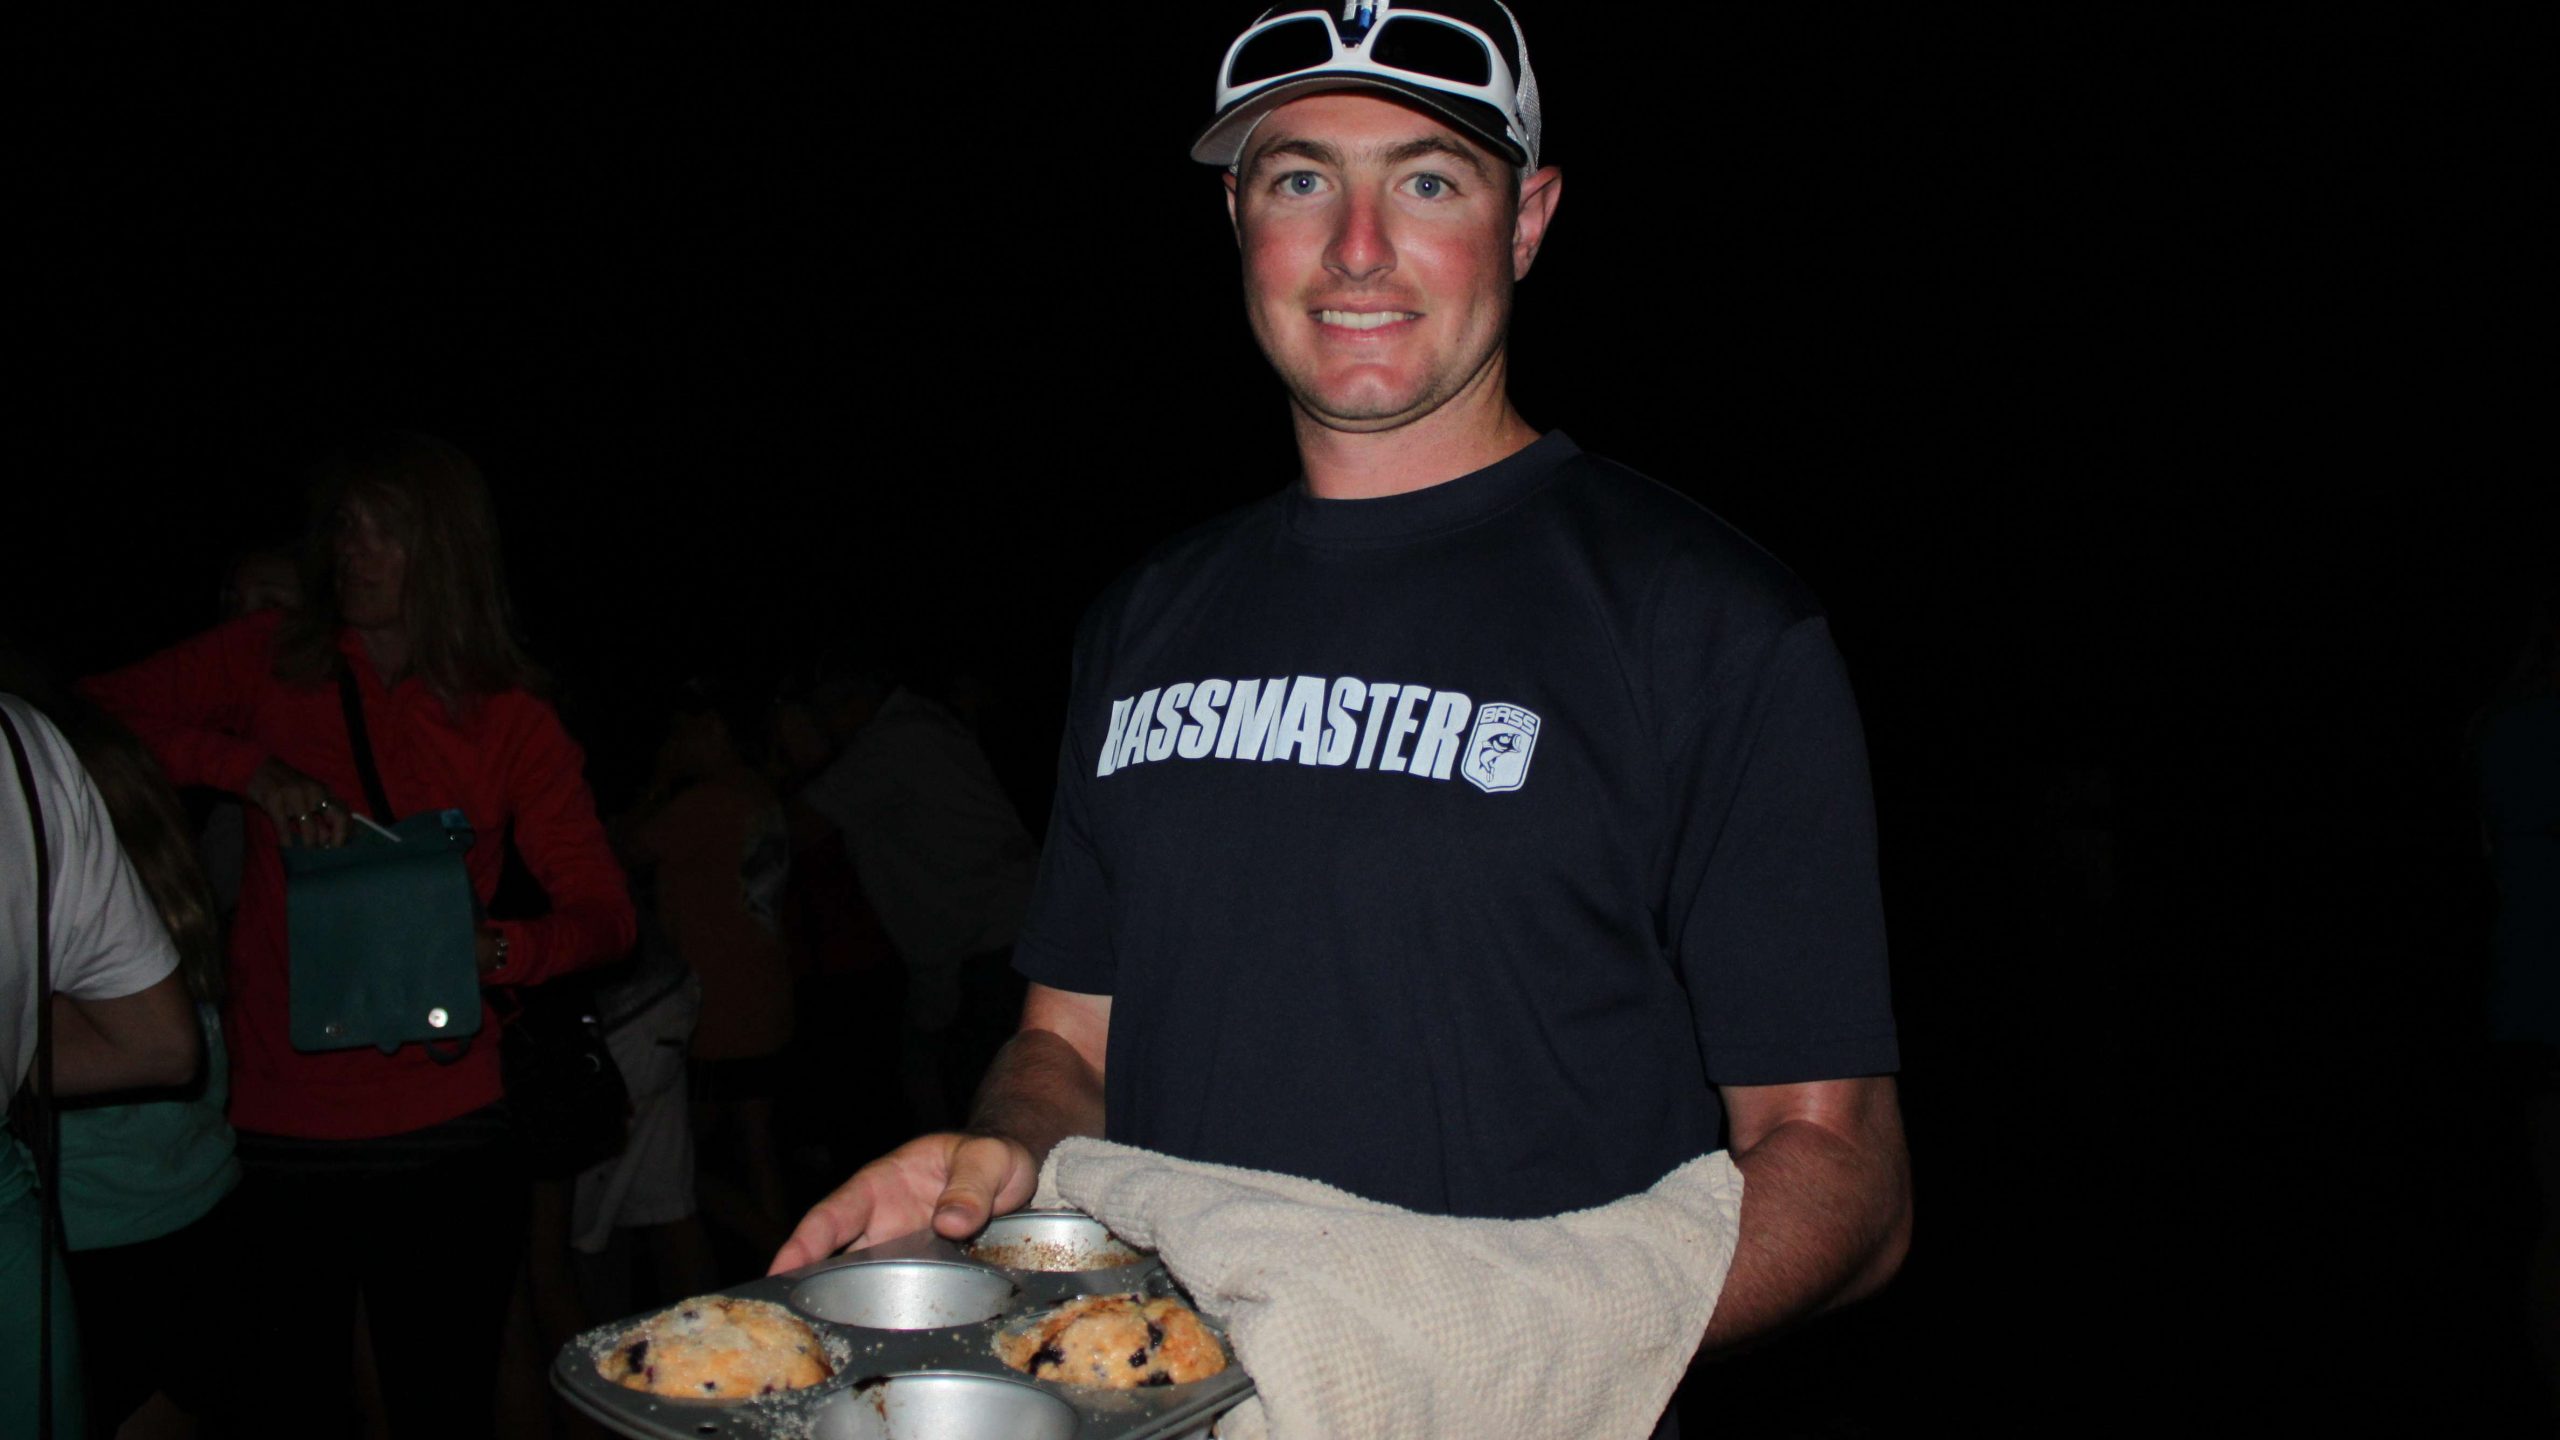 Look there! Itâs Bethel University angler Brian Pahl with the tasty pastry. Pahl was one of eight anglers in the bracket championship, but didnât advance past Thursdayâs opening round.